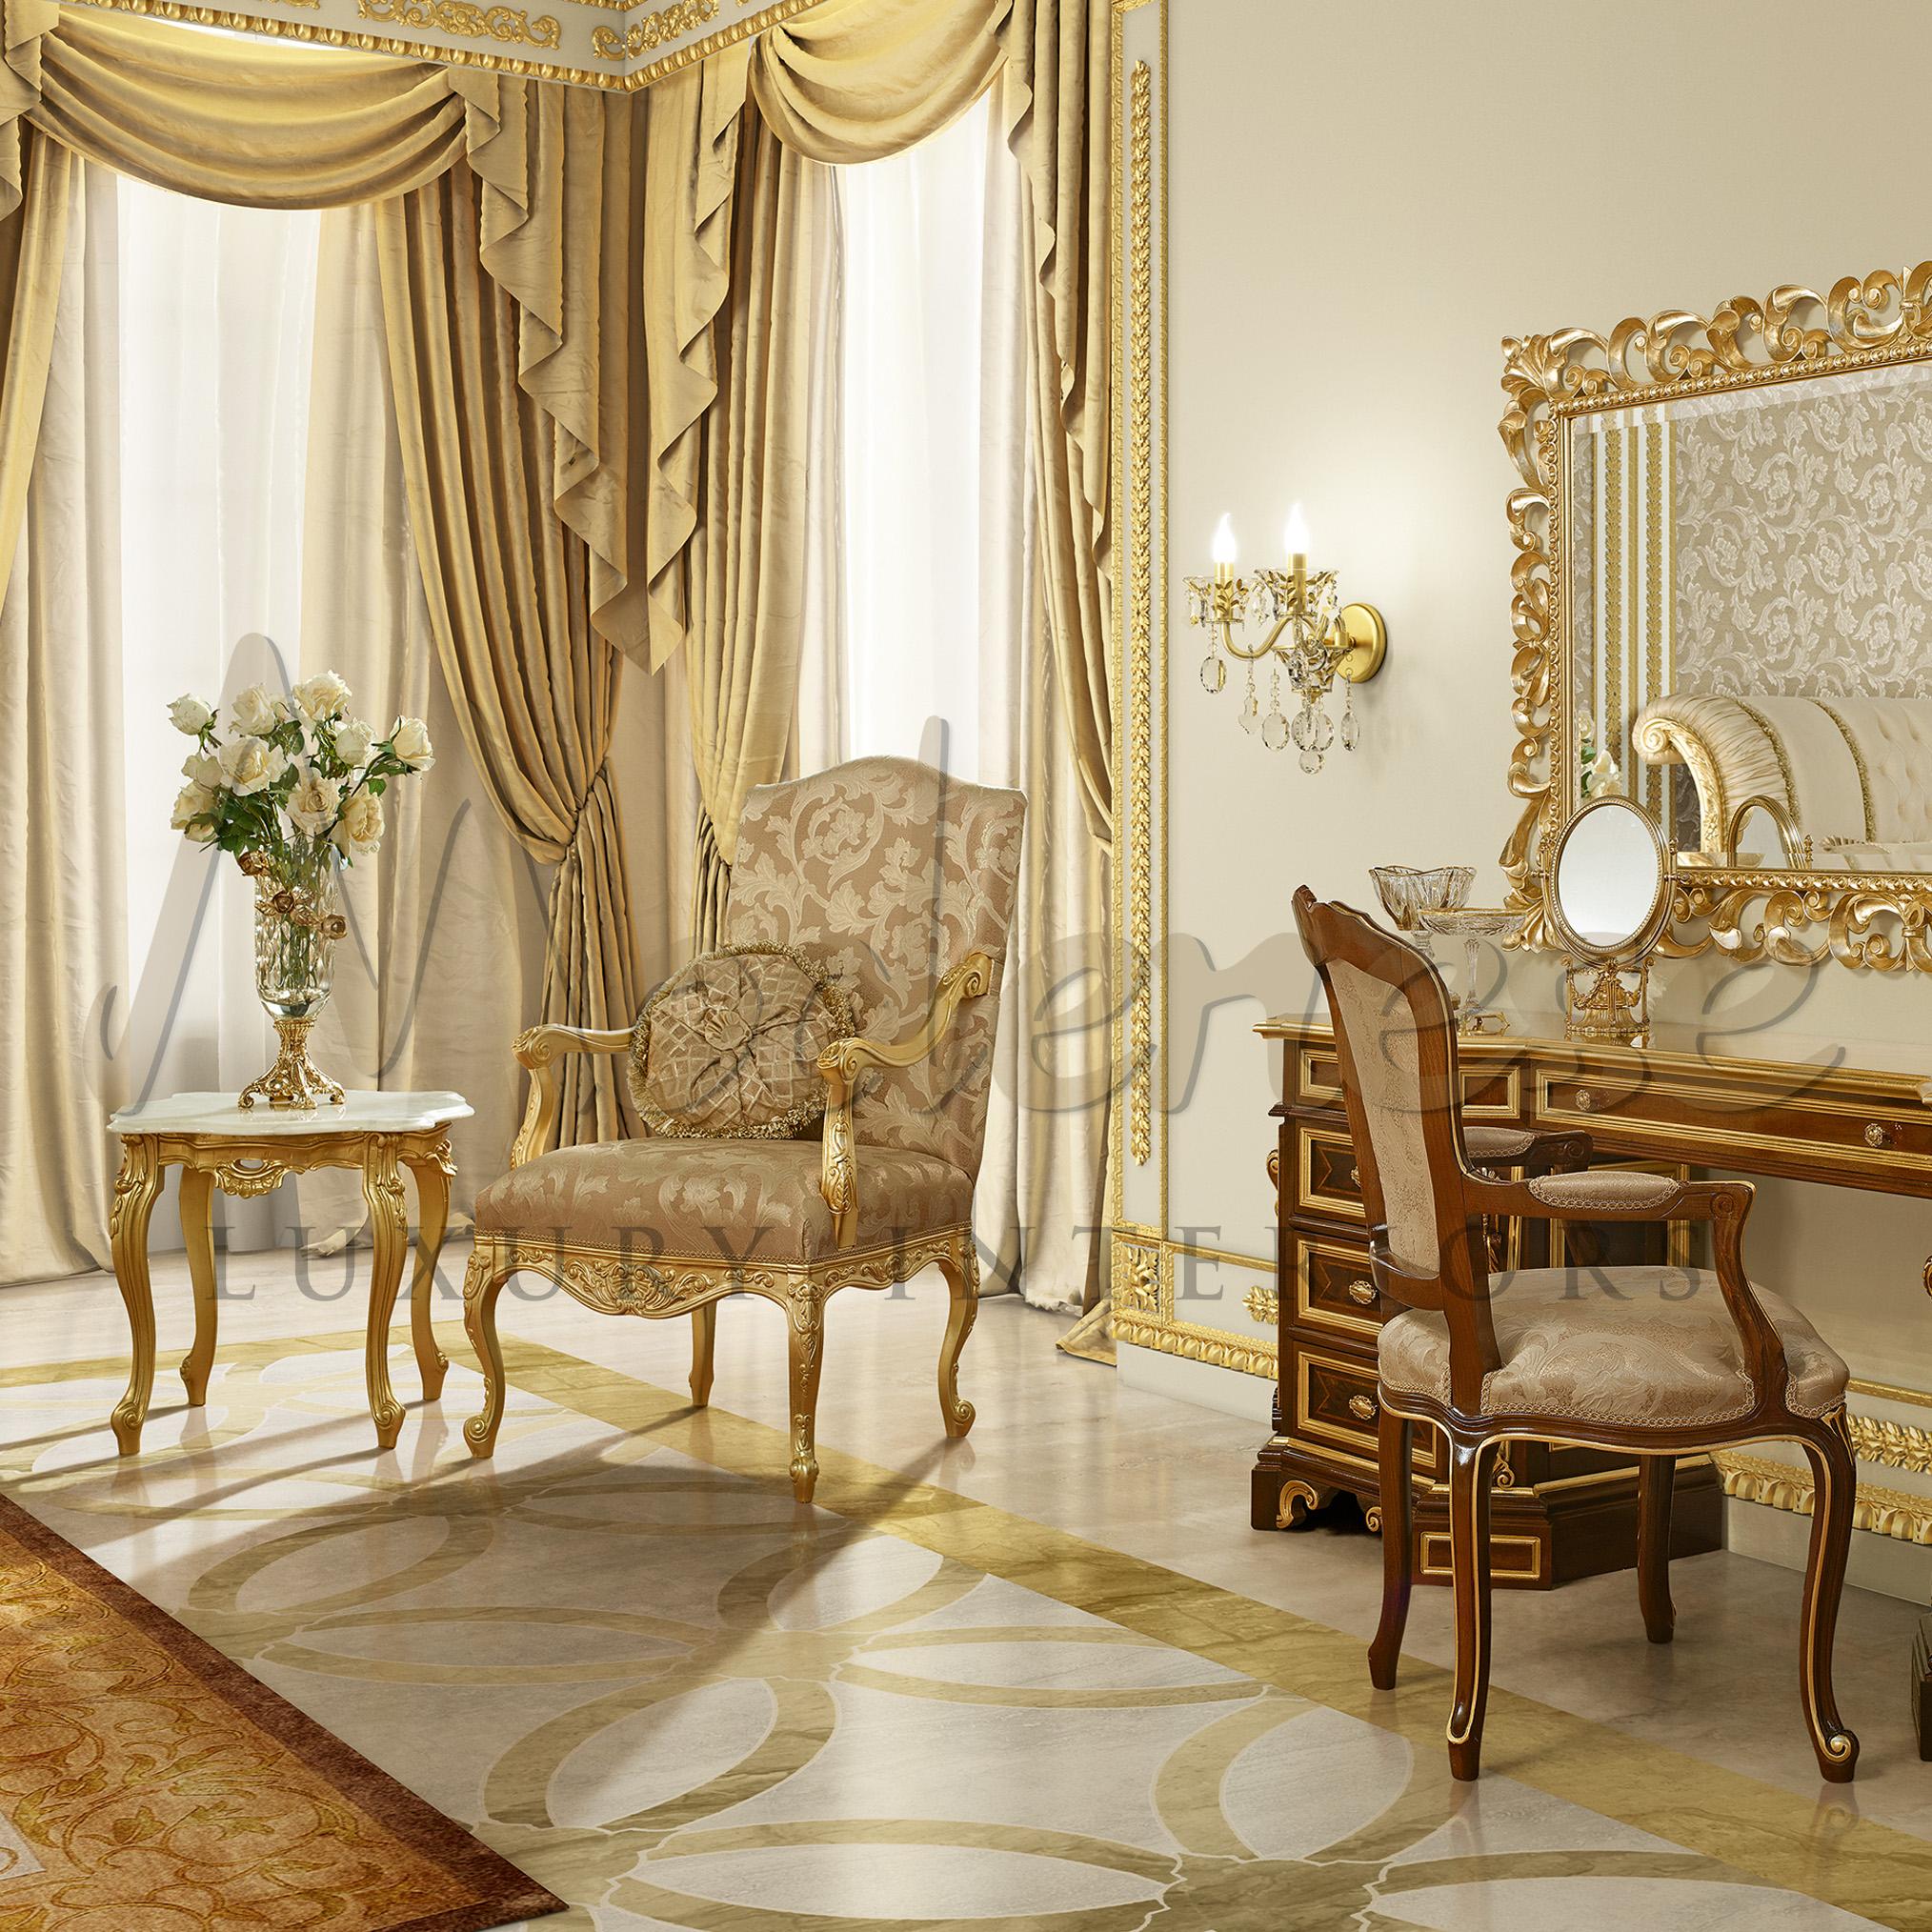 Adding a sophisticate touch to your room with a golden beige armchair decorated with gold leaf finishes. Elegantly wrapped with our own design of damask upholstered fabric. Outstanding on the golden frame and cabriole legs handcrafted in everystep